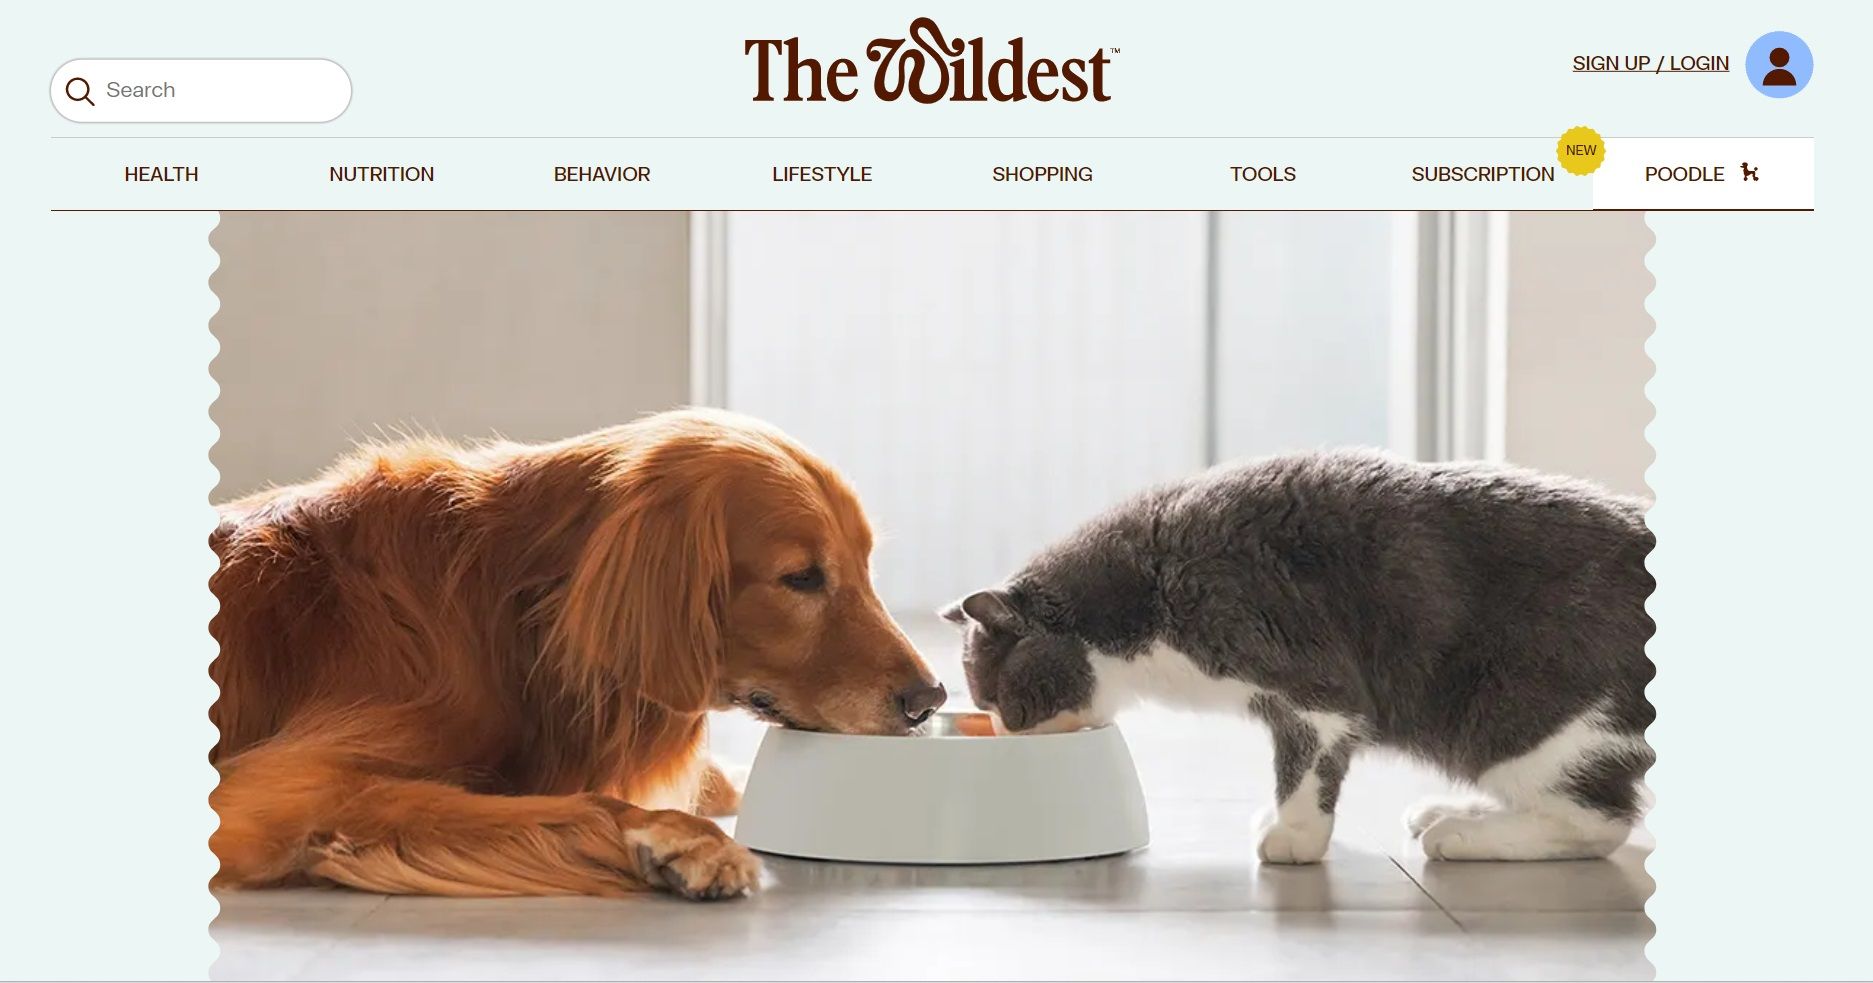 Image of dog and cat on The Wildest